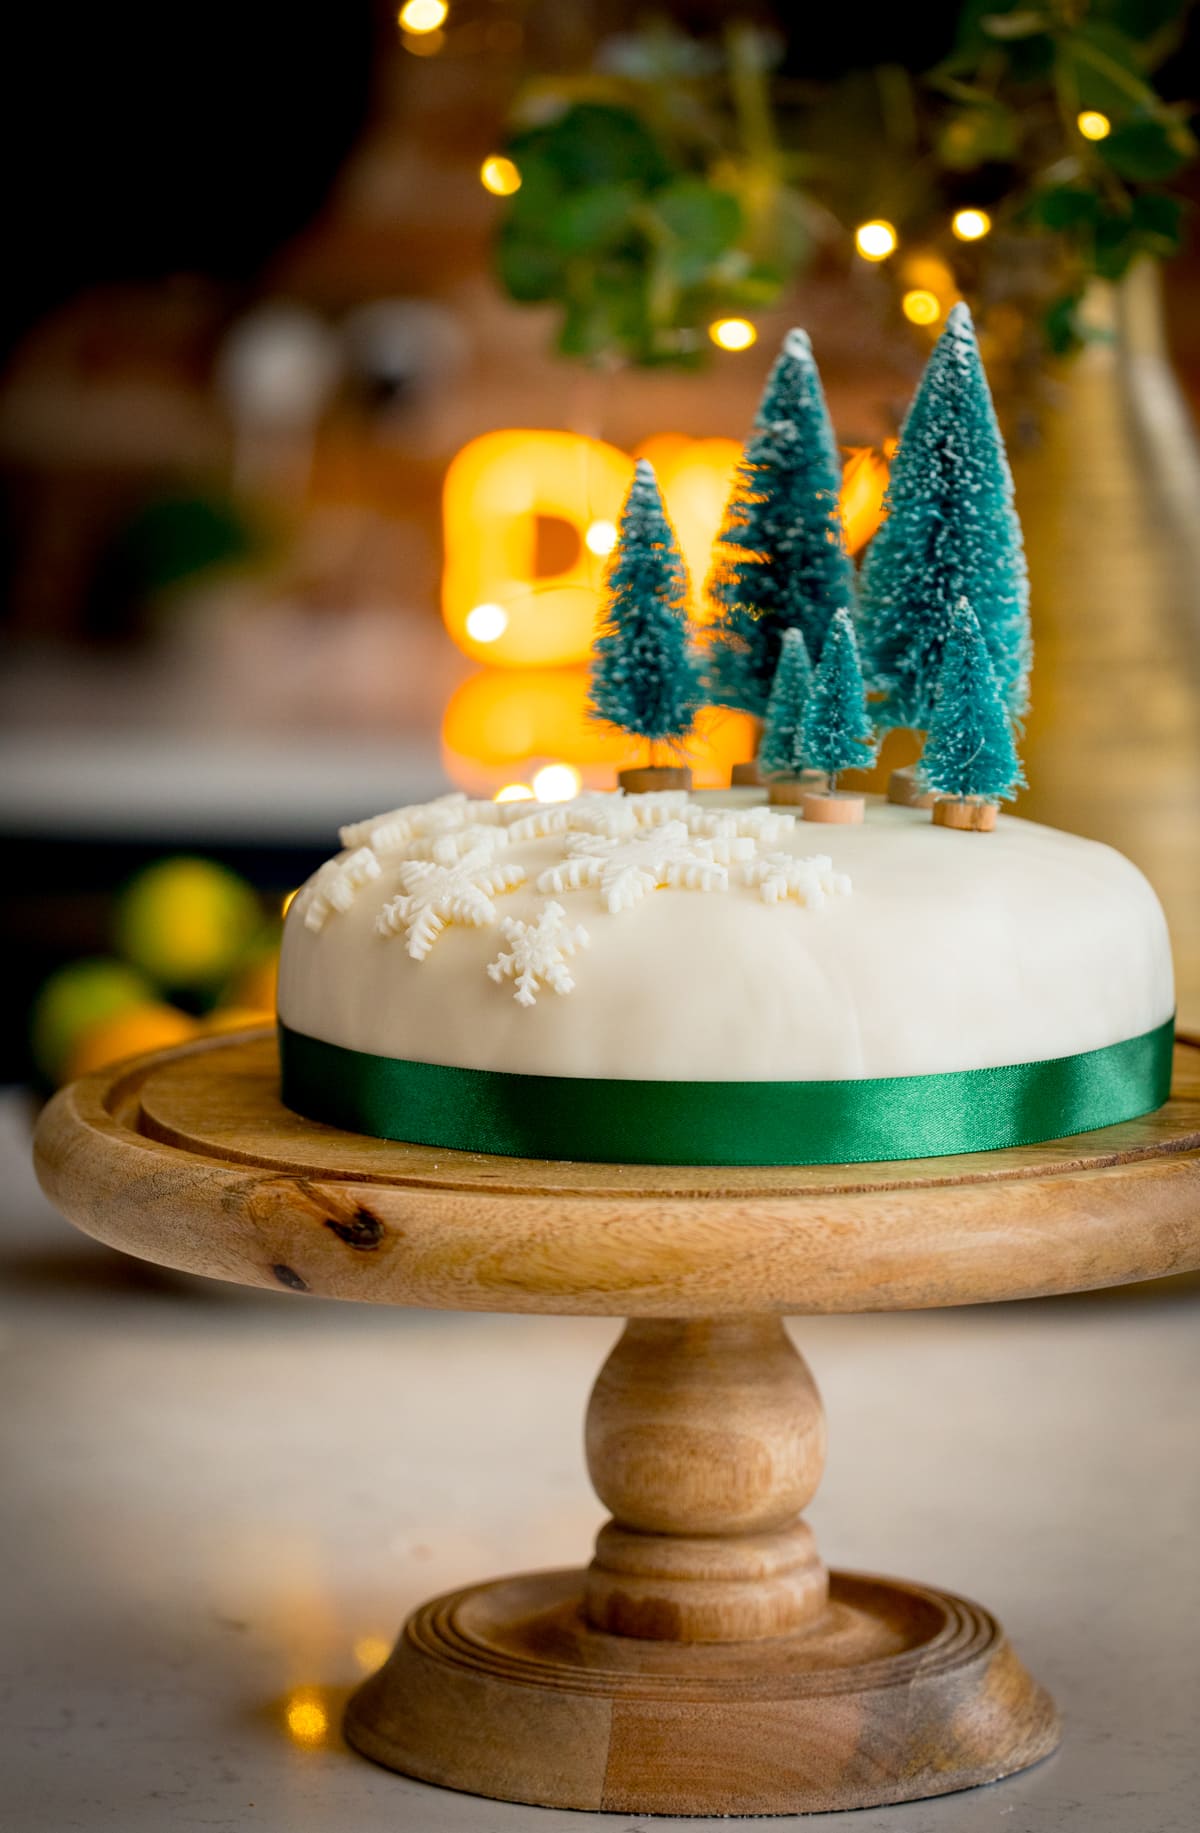 Tall side-on image showing a simple decorated Christmas cake - with a green ribbon surrounding the cake, white fondant snow flakes and mini Christmas trees on top. The cake is on a wooden cake stand on a kitchen surface with glowy lights and a bowl of fruit in the background.